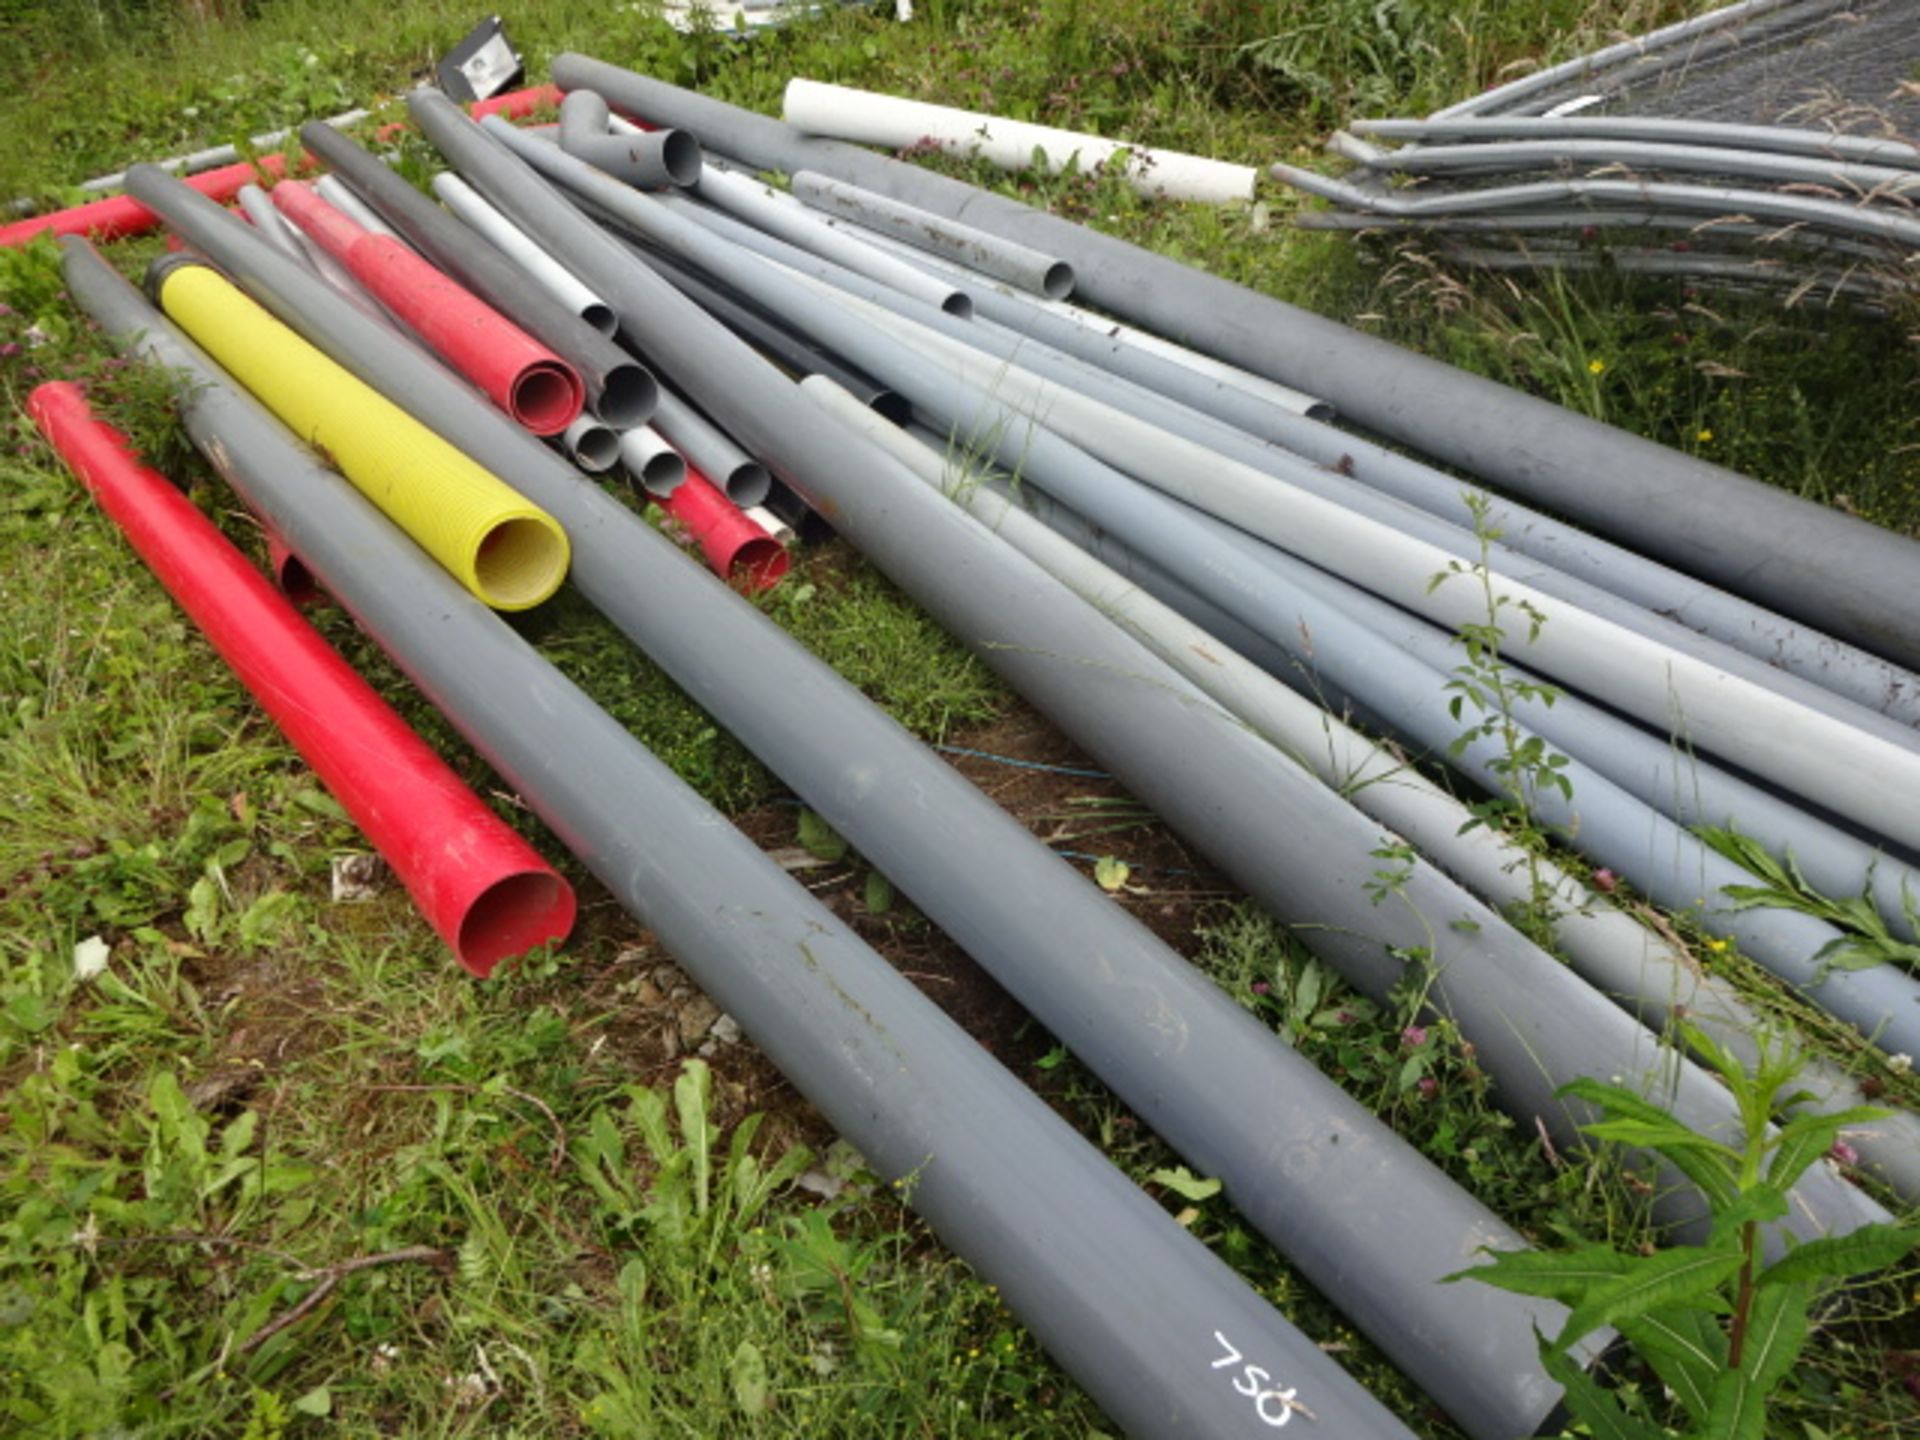 Quantity of random plastic piping and ducting